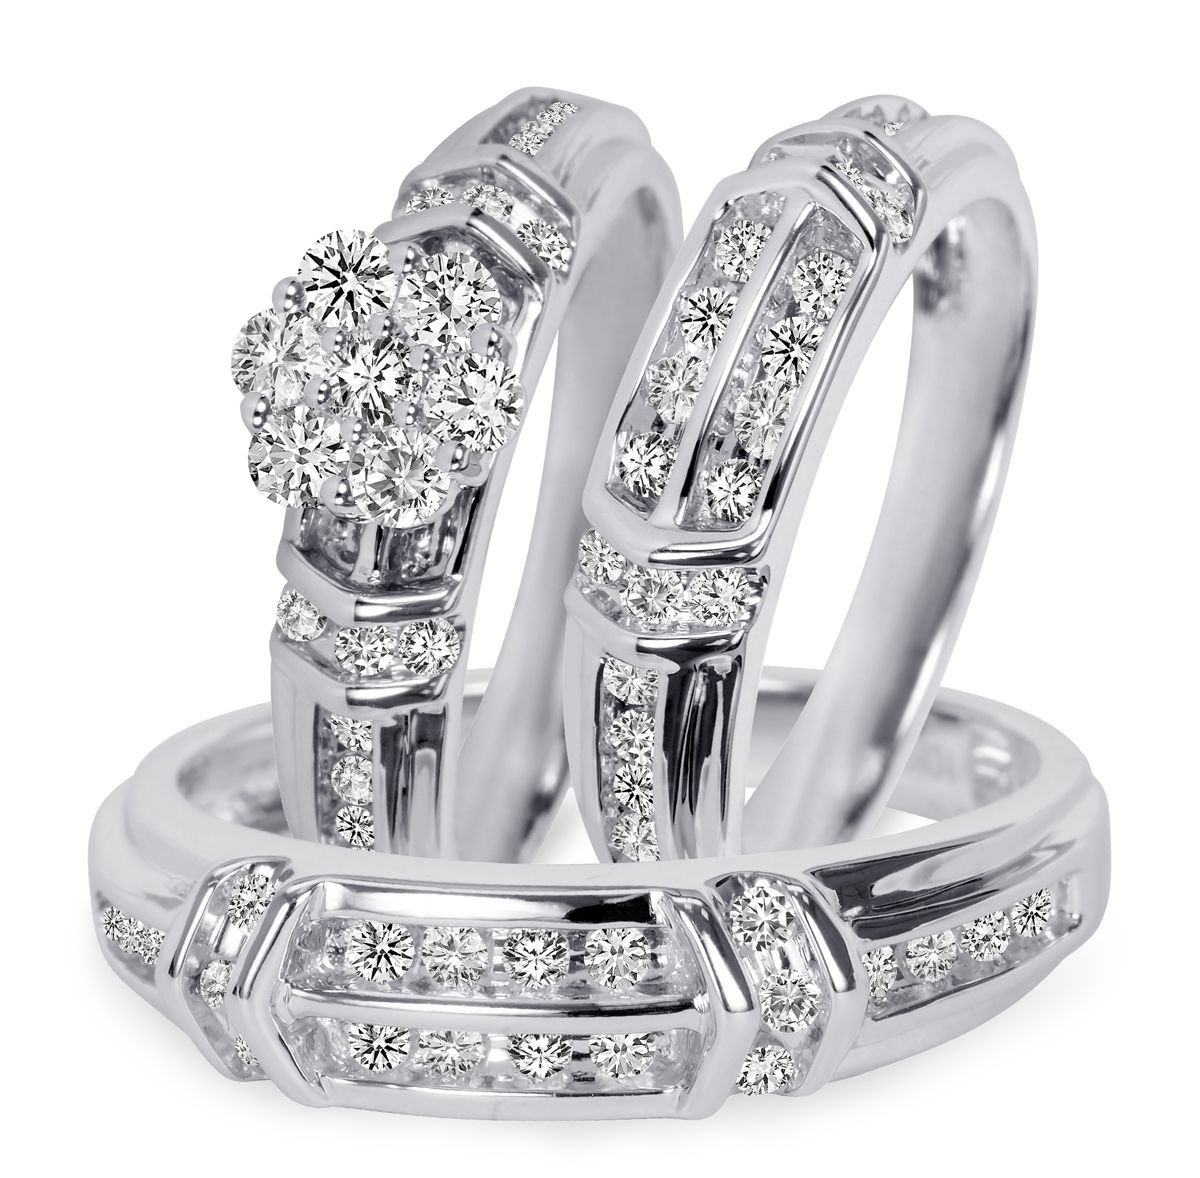 Wedding Ring Sets For Him And Her White Gold
 1 1 10 Carat T W Diamond Trio Matching Wedding Ring Set